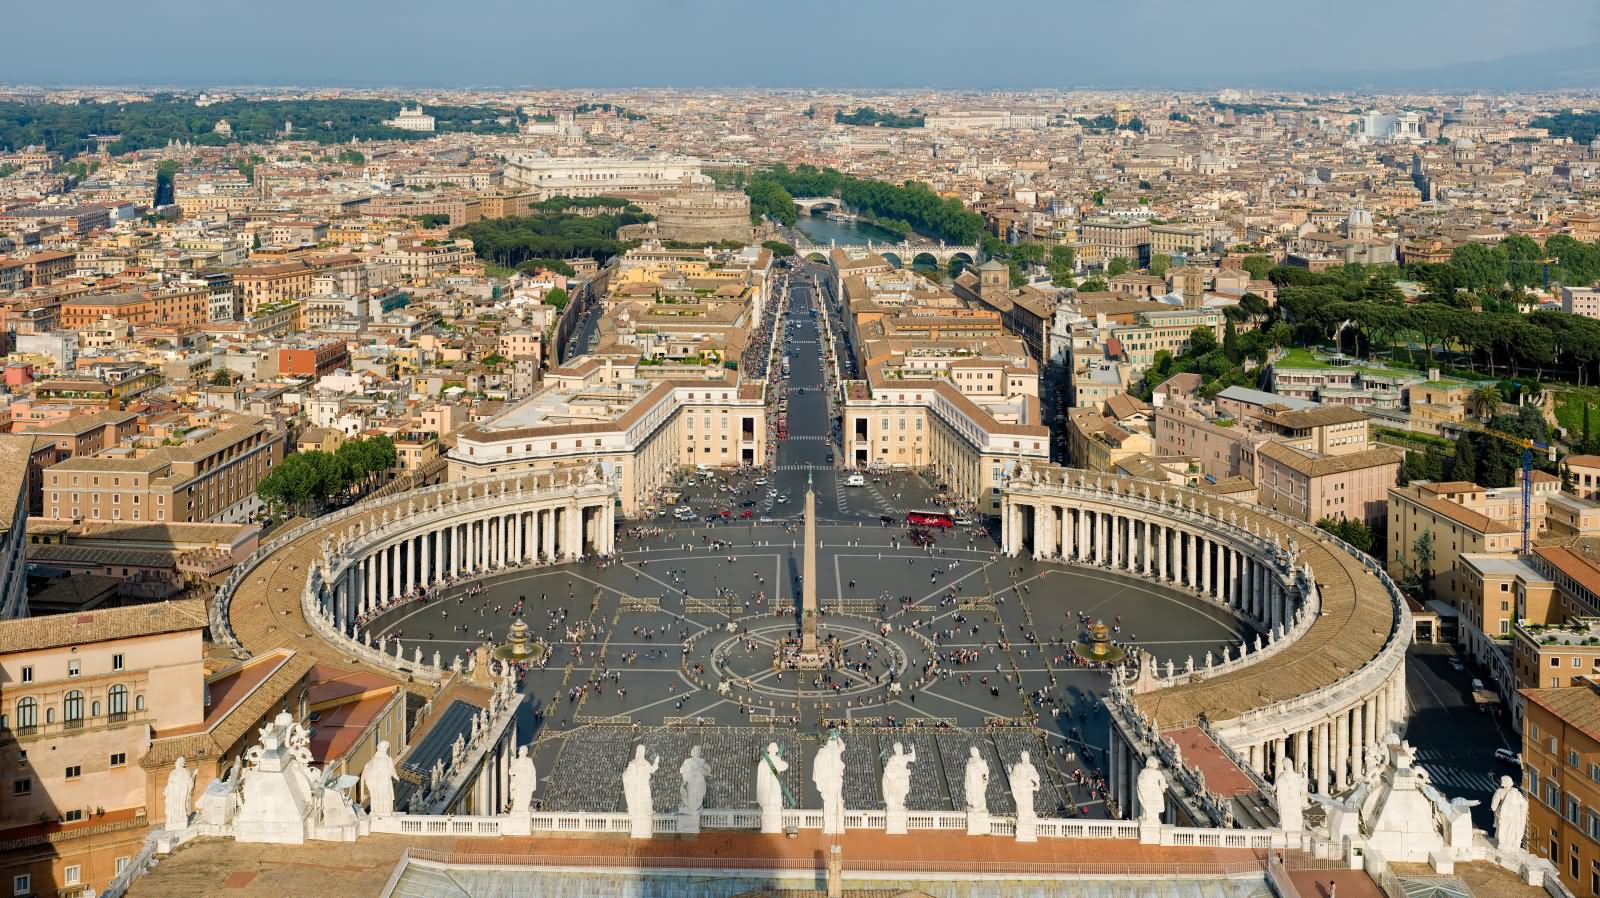 View Of Vatican City From The Dome Of St. Peter's Basilica